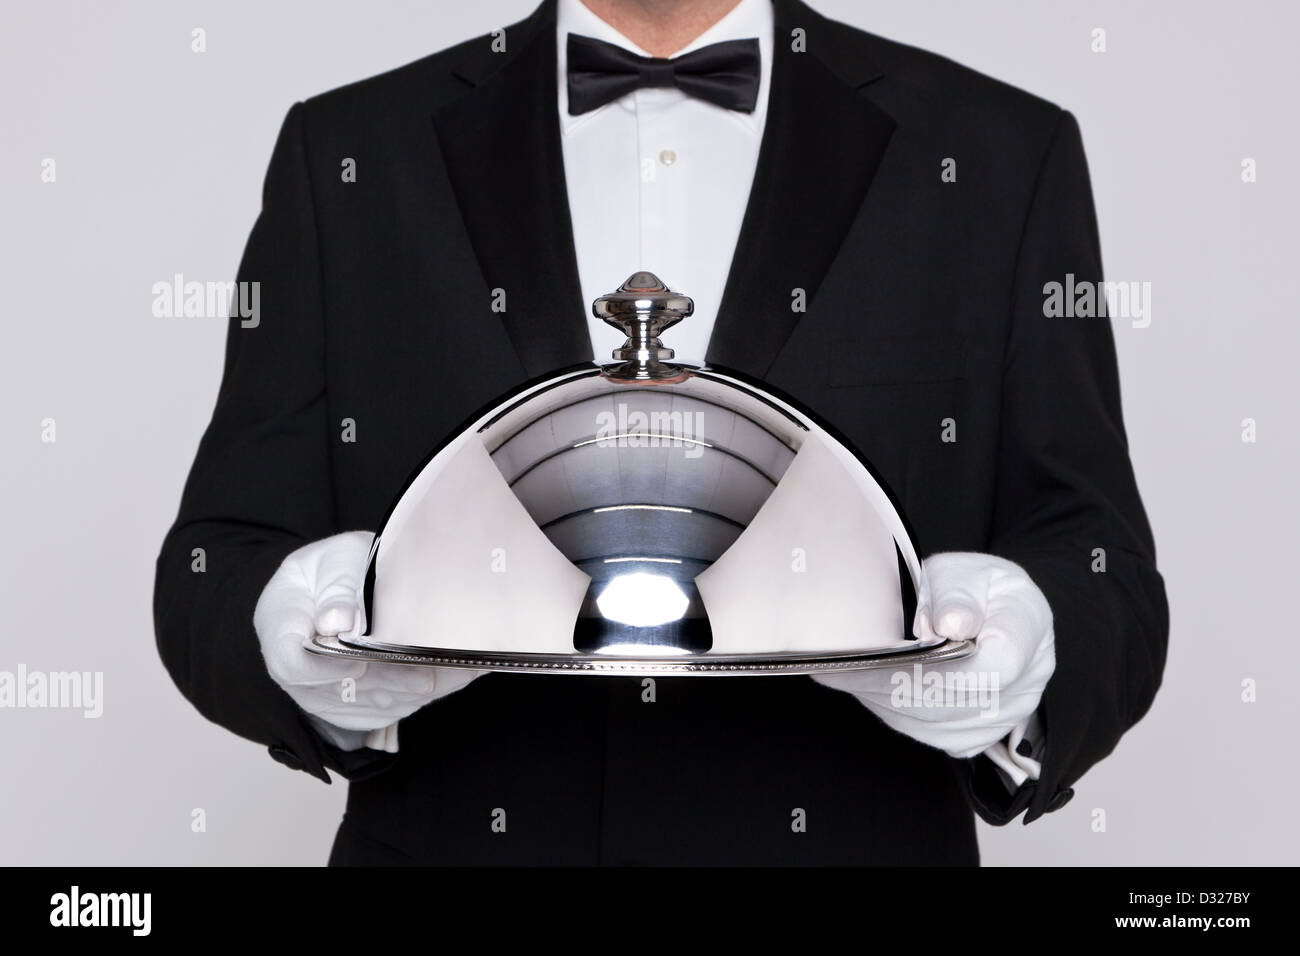 Waiter serving a meal under a silver cloche or dome Stock Photo